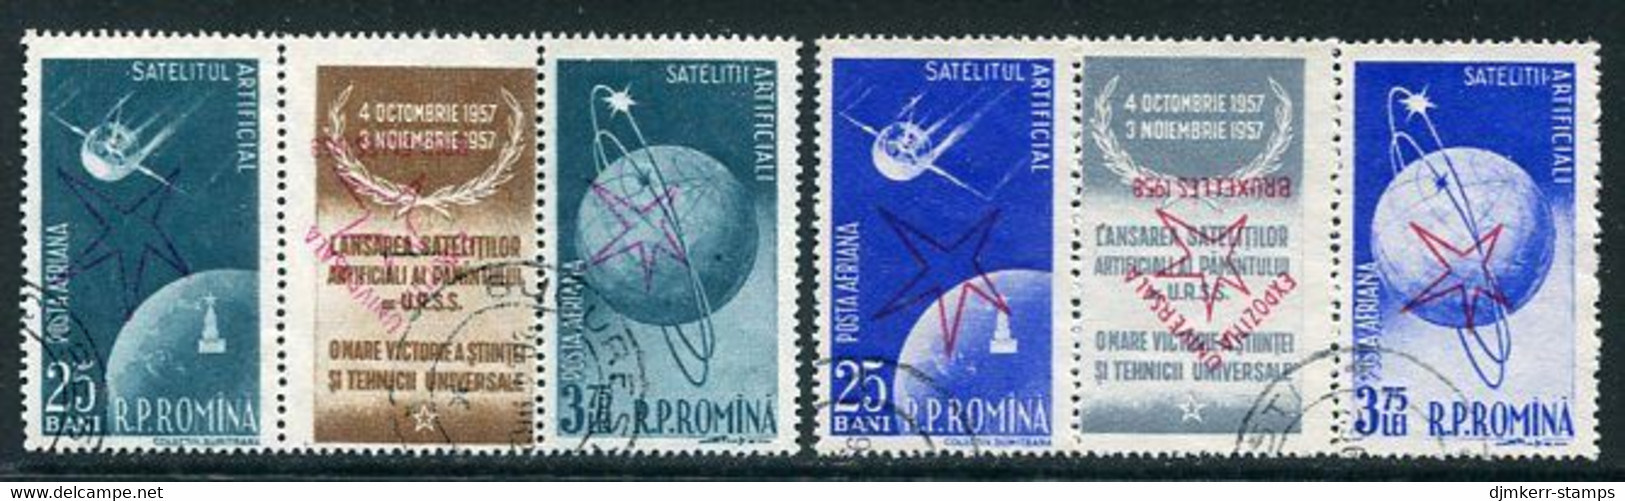 ROMANIA 1958 Brussels Exhibition Inverted Overprint Strips Used.  Michel 1717-20 K - Usado